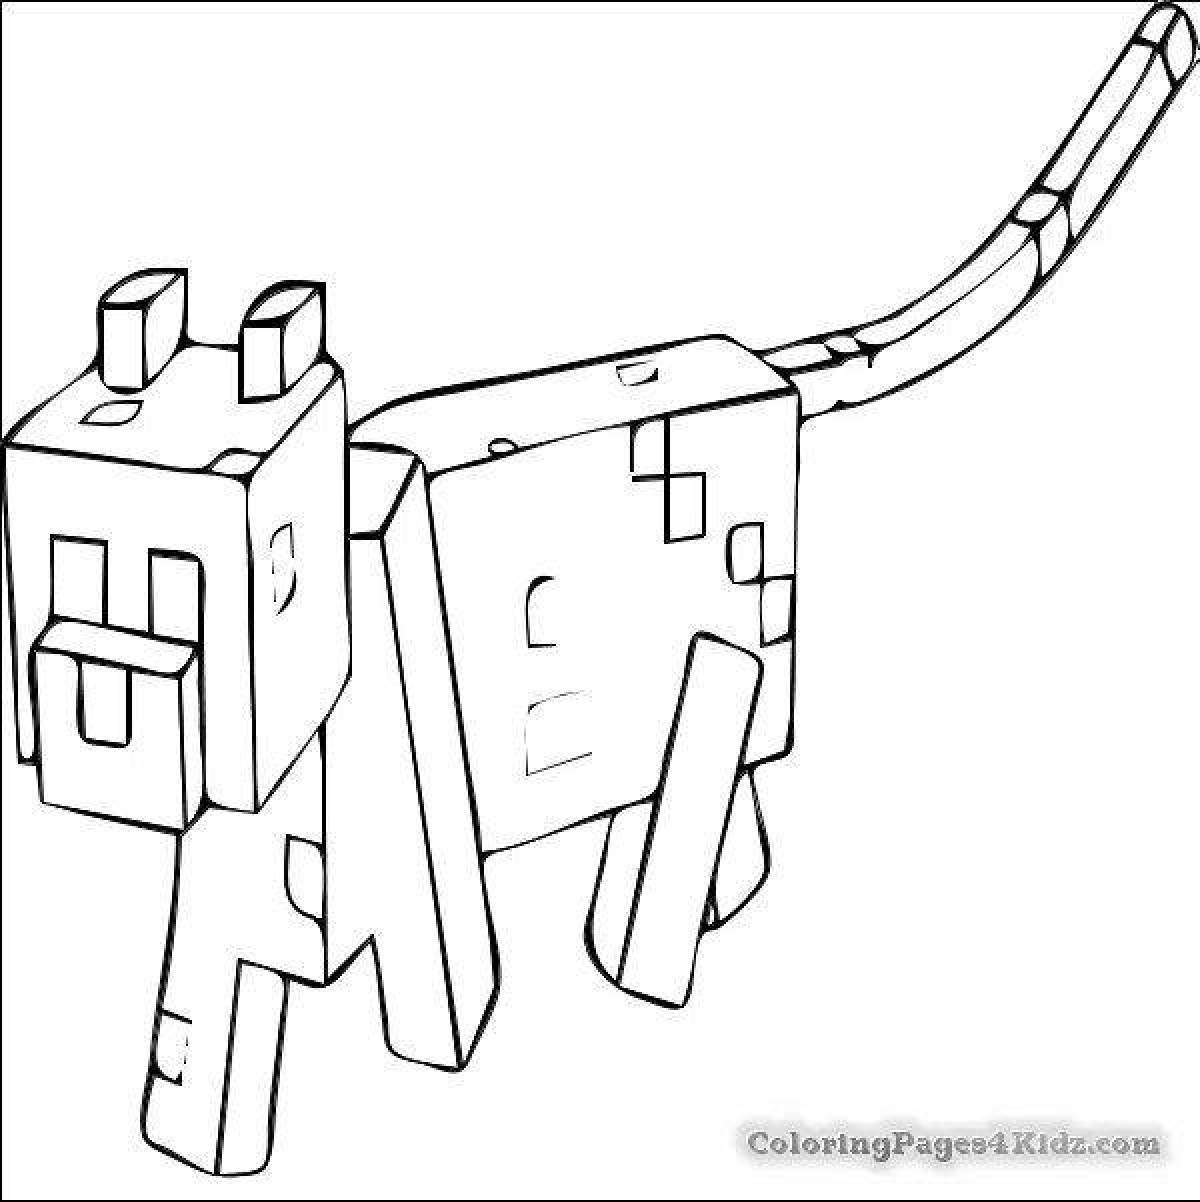 Cute minecraft cat coloring page